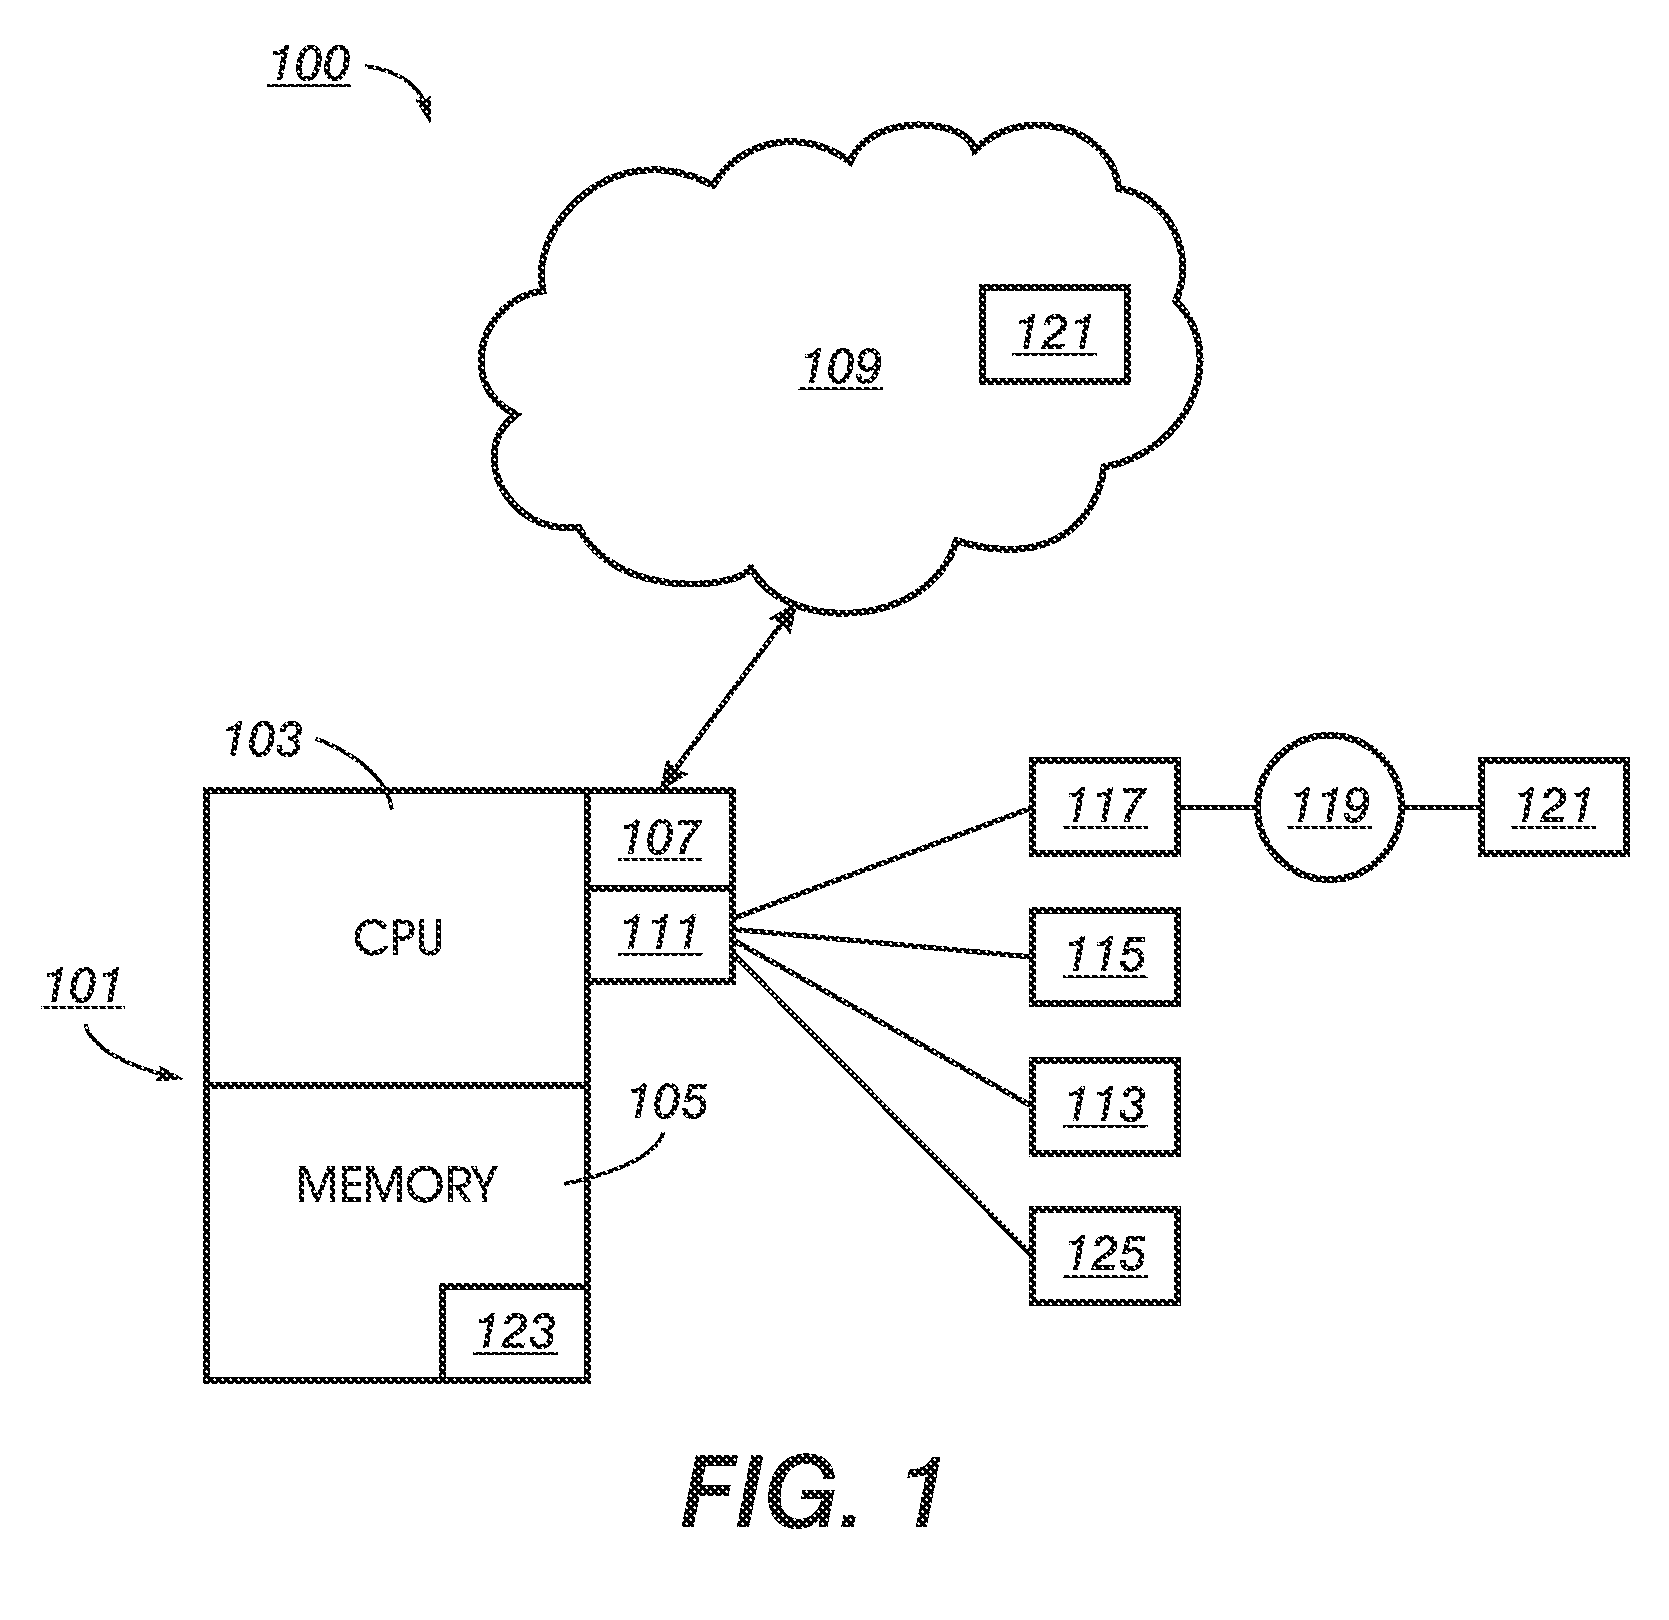 Method, Apparatus, And Program Product For Efficiently Defining Relationships In A Comprehension State Of A Collection Of Information